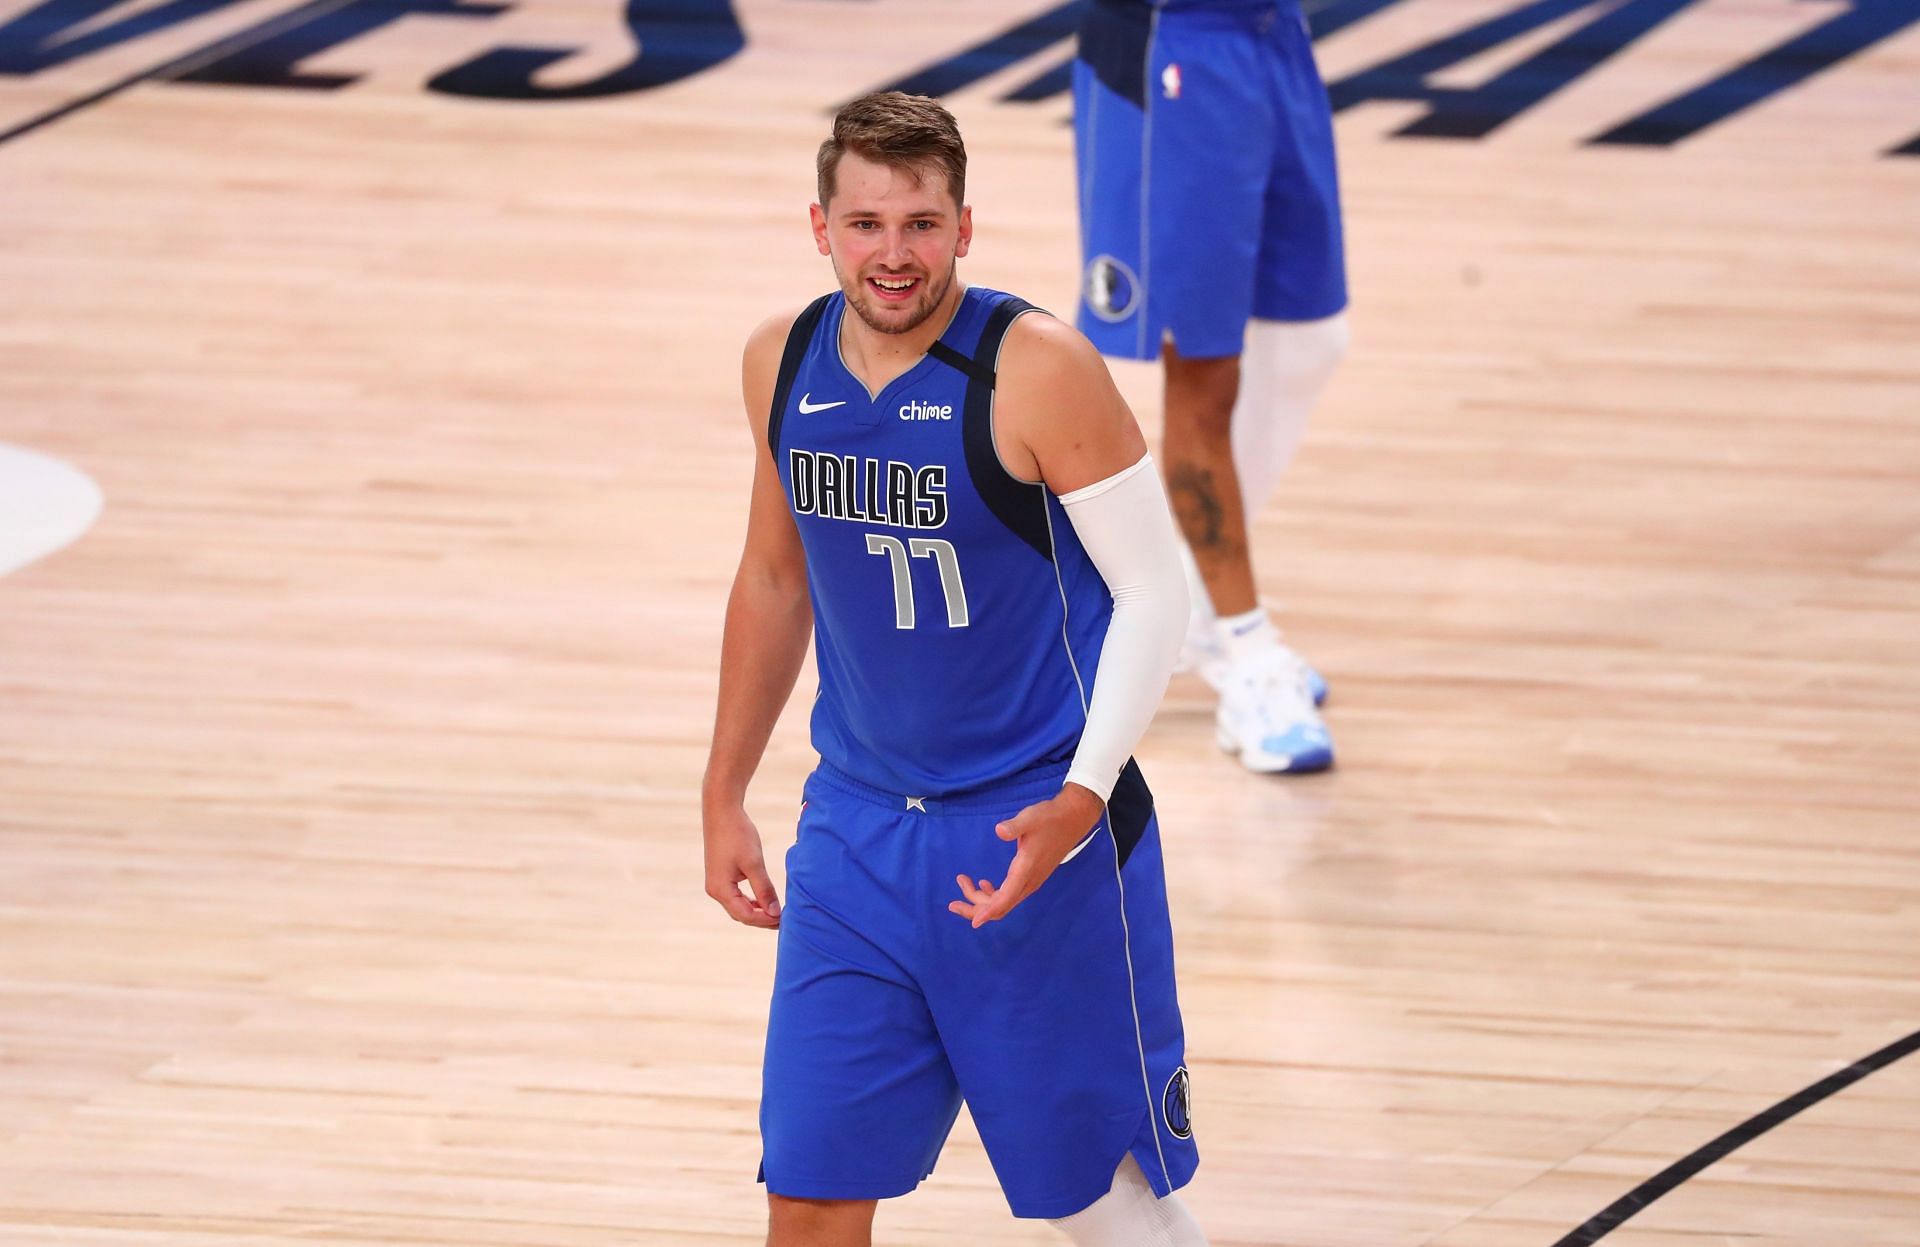 Luka Doncic of the Dallas Mavericks in the 2020 NBA Playoffs.